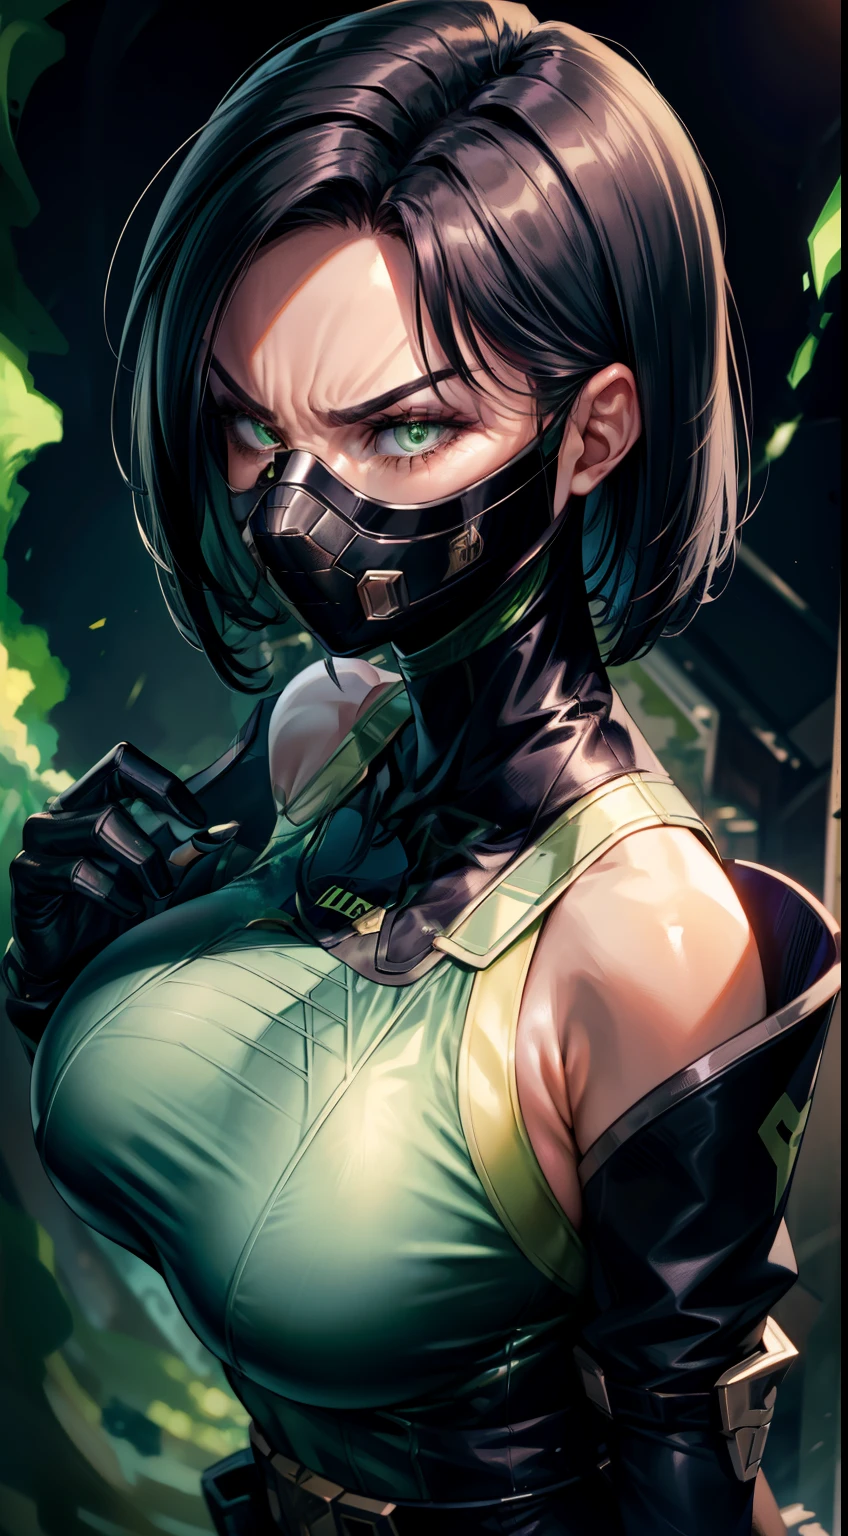 Masterpiece, Best quality,look from down，Facing the screen，《Fearless viper》, tightsuit, mitts, belt, thigh boots, respirator, view the viewer, face, Portrait, Close-up, Super close，Red-faced，Glowing eyes, green smoke, Black background,huge tit，Raised chest，Close-up of chest，oversized ，chest focus，Woman in a swimsuit，angry look，Extremely erotic figure，Staring angrily at the screen，Facing the screen，High-gloss dark style